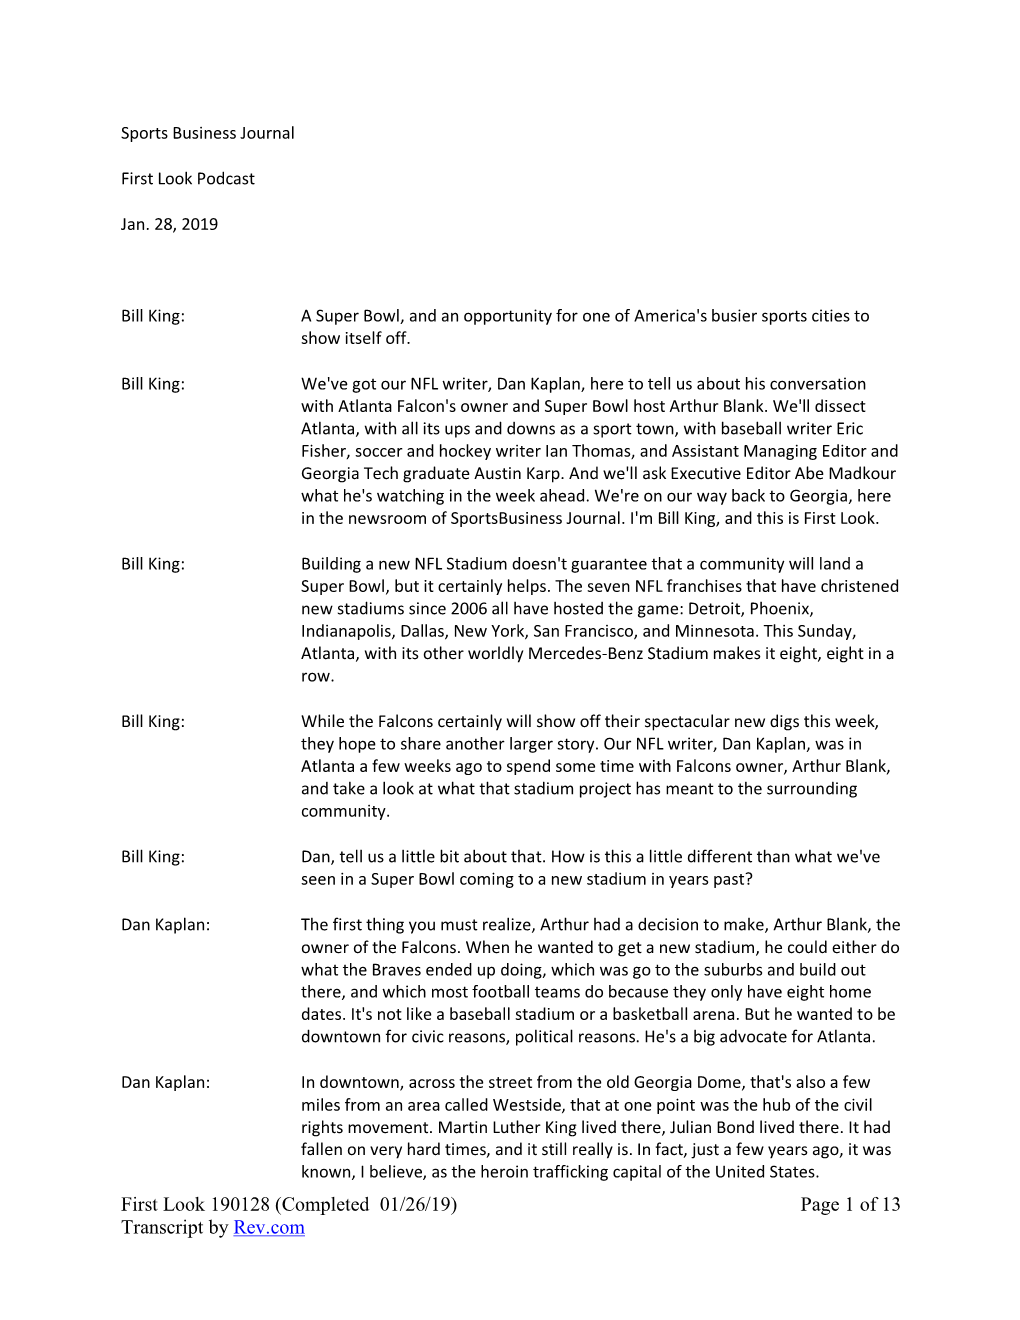 First Look 190128 (Completed 01/26/19) Page 1 of 13 Transcript by Rev.Com